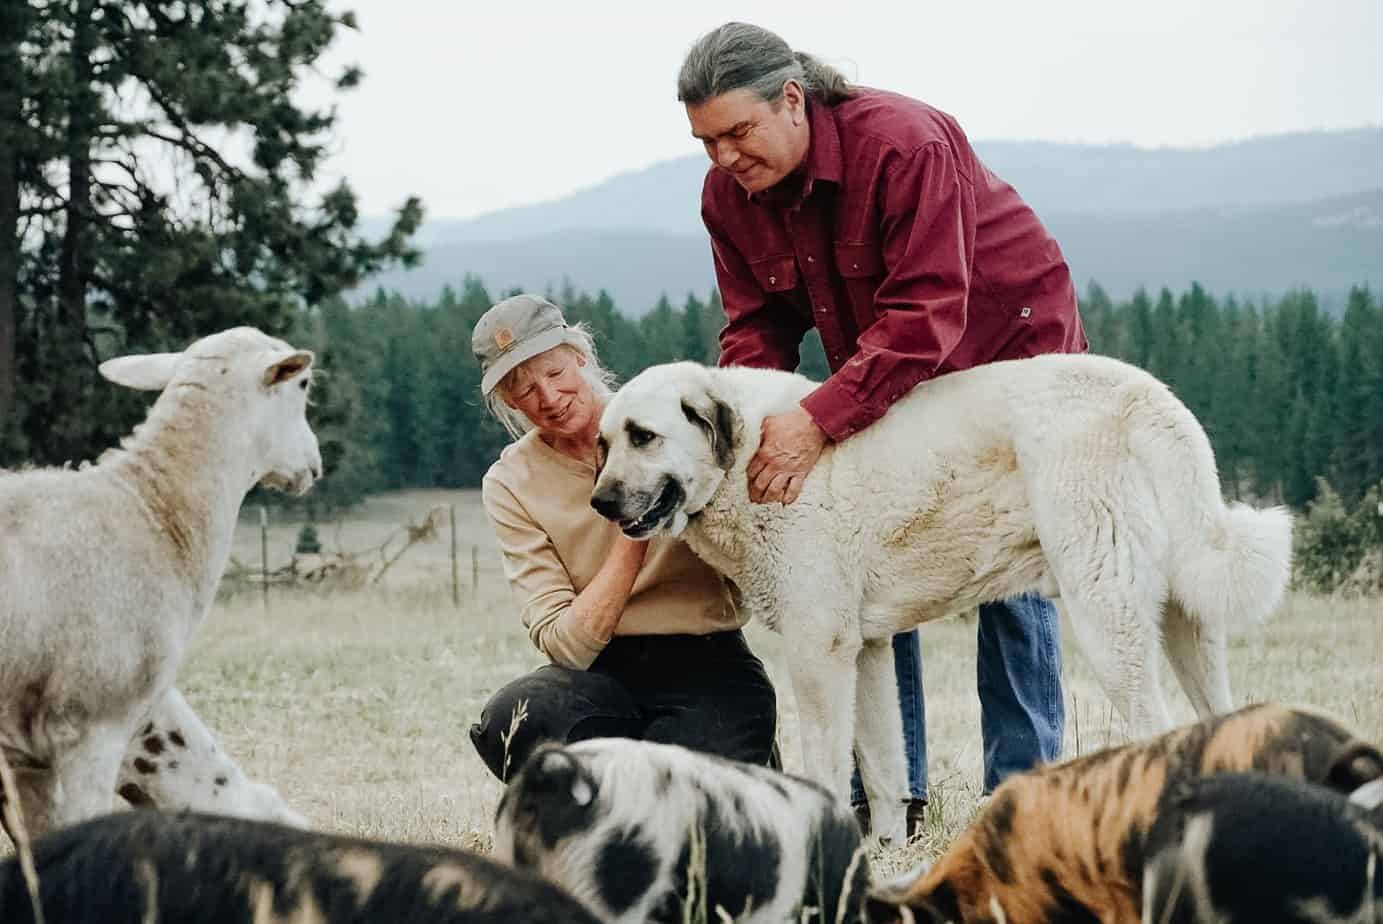 Sue & Peter on farm with livestock and guardian dog.